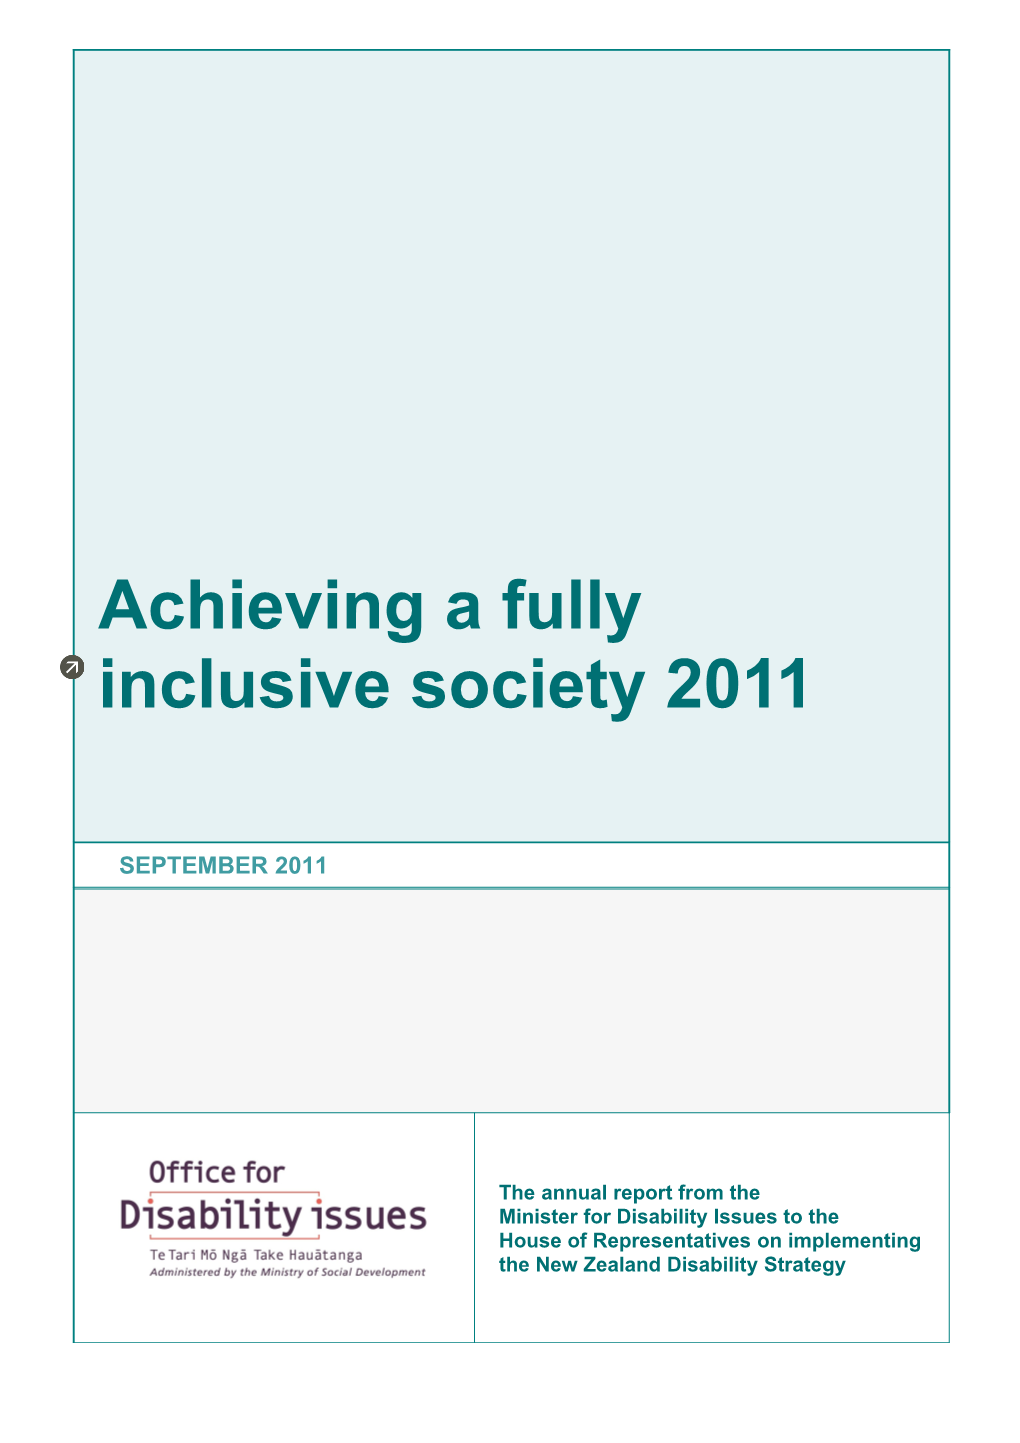 Achieving a Fully Inclusive Society 2011